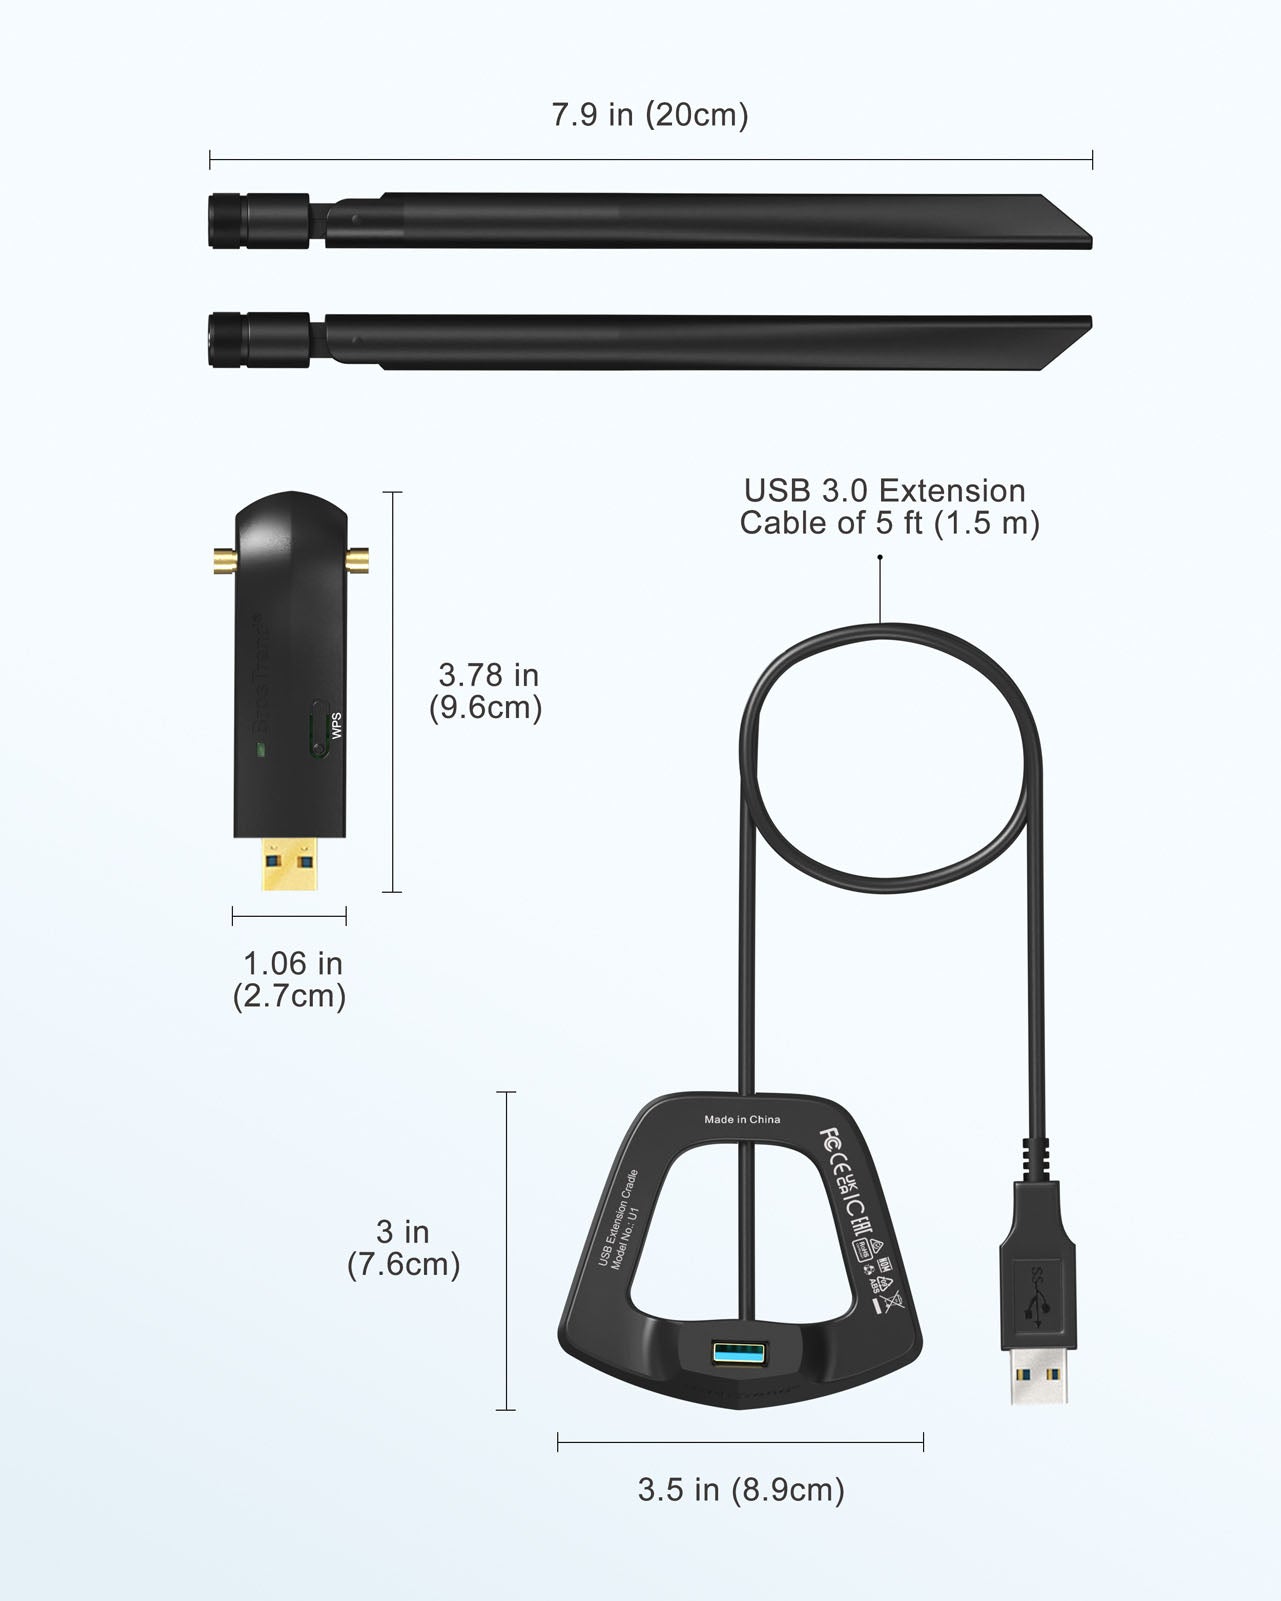 BrosTrend 1200Mbps Linux Compatible USB WiFi Adapter Comes with 2 Pieces of External Antennas and USB 3.0 Extension Cable of 5 Feet